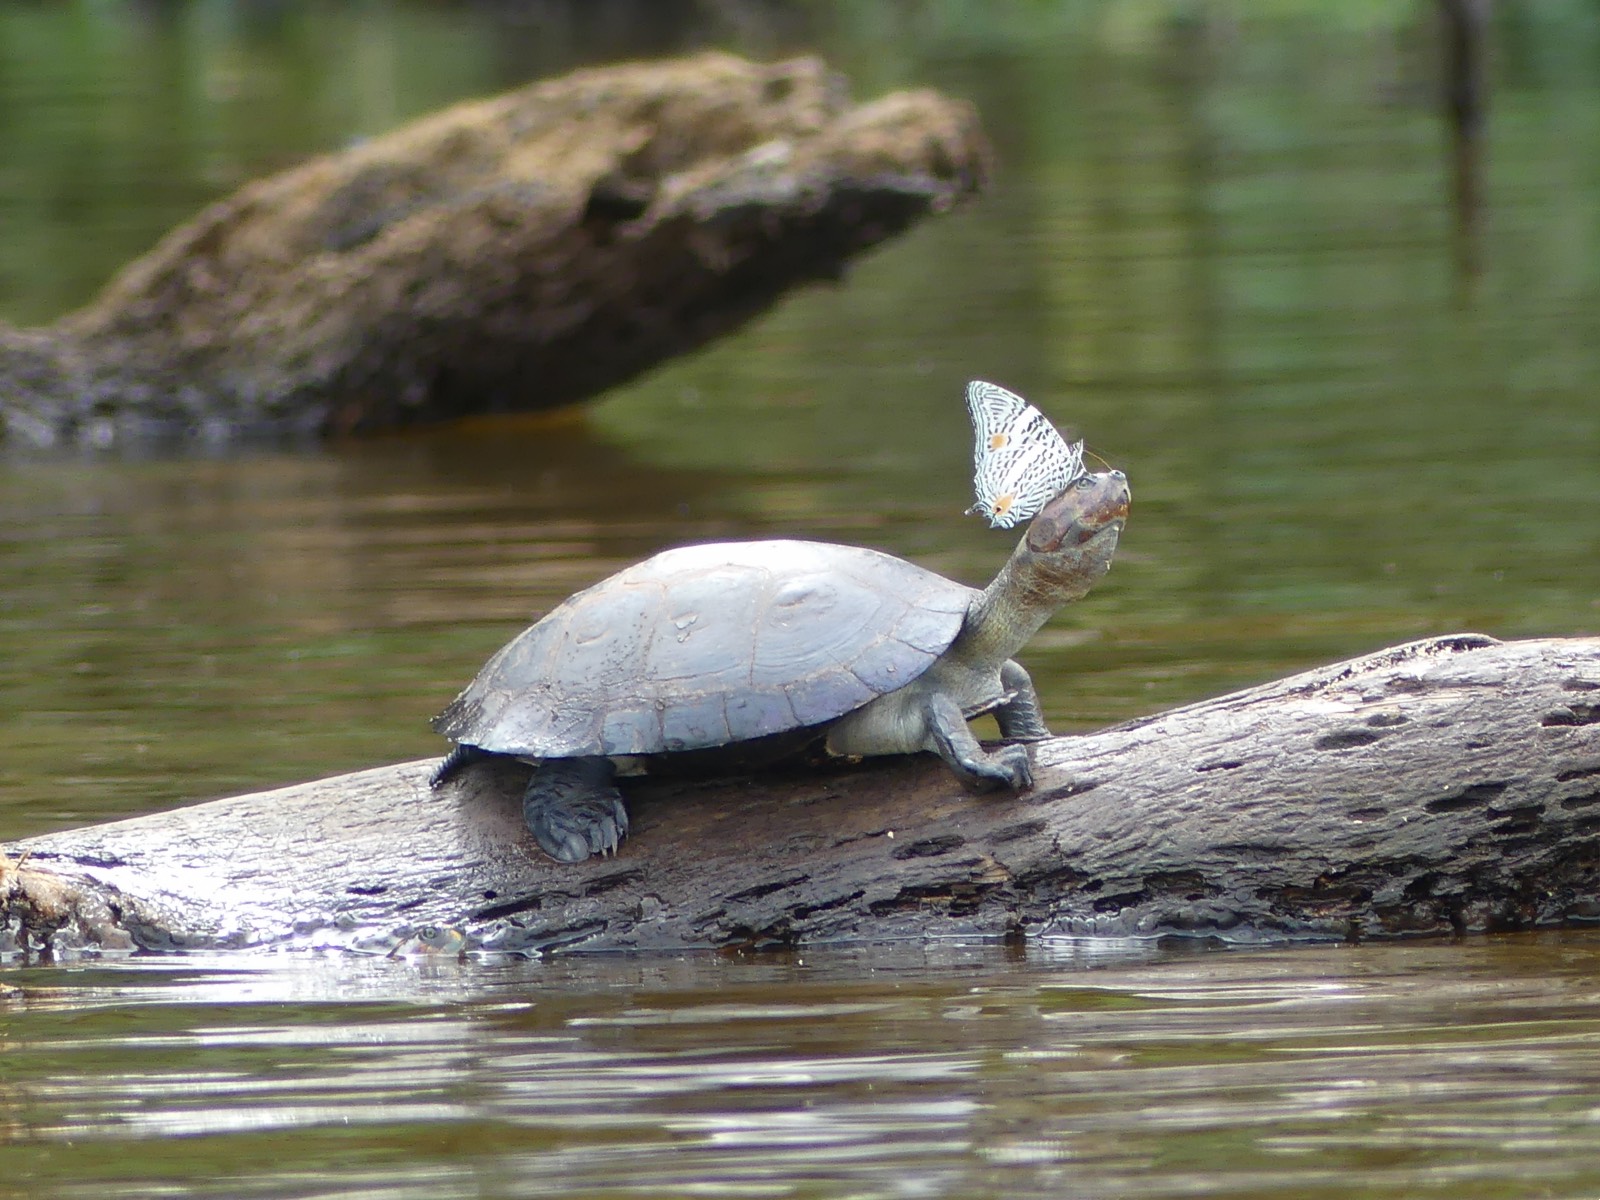 A butterfly on a turtle